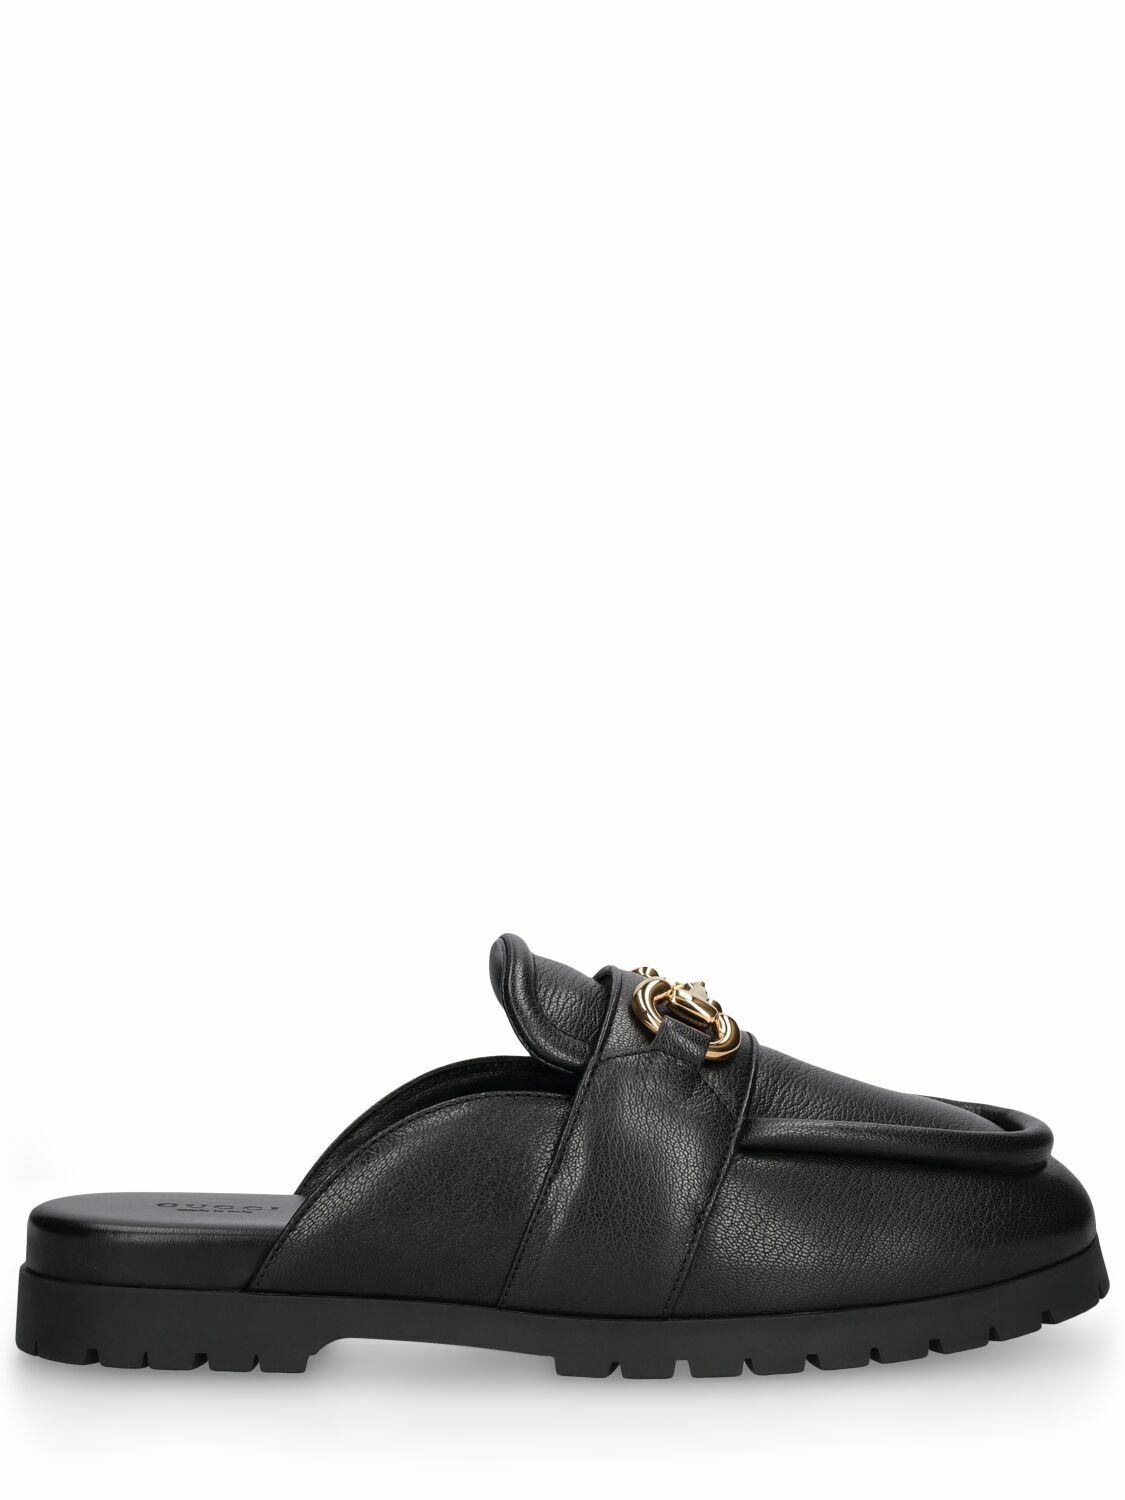 Photo: GUCCI - 20mm Horsebit Leather Loafer Slippers